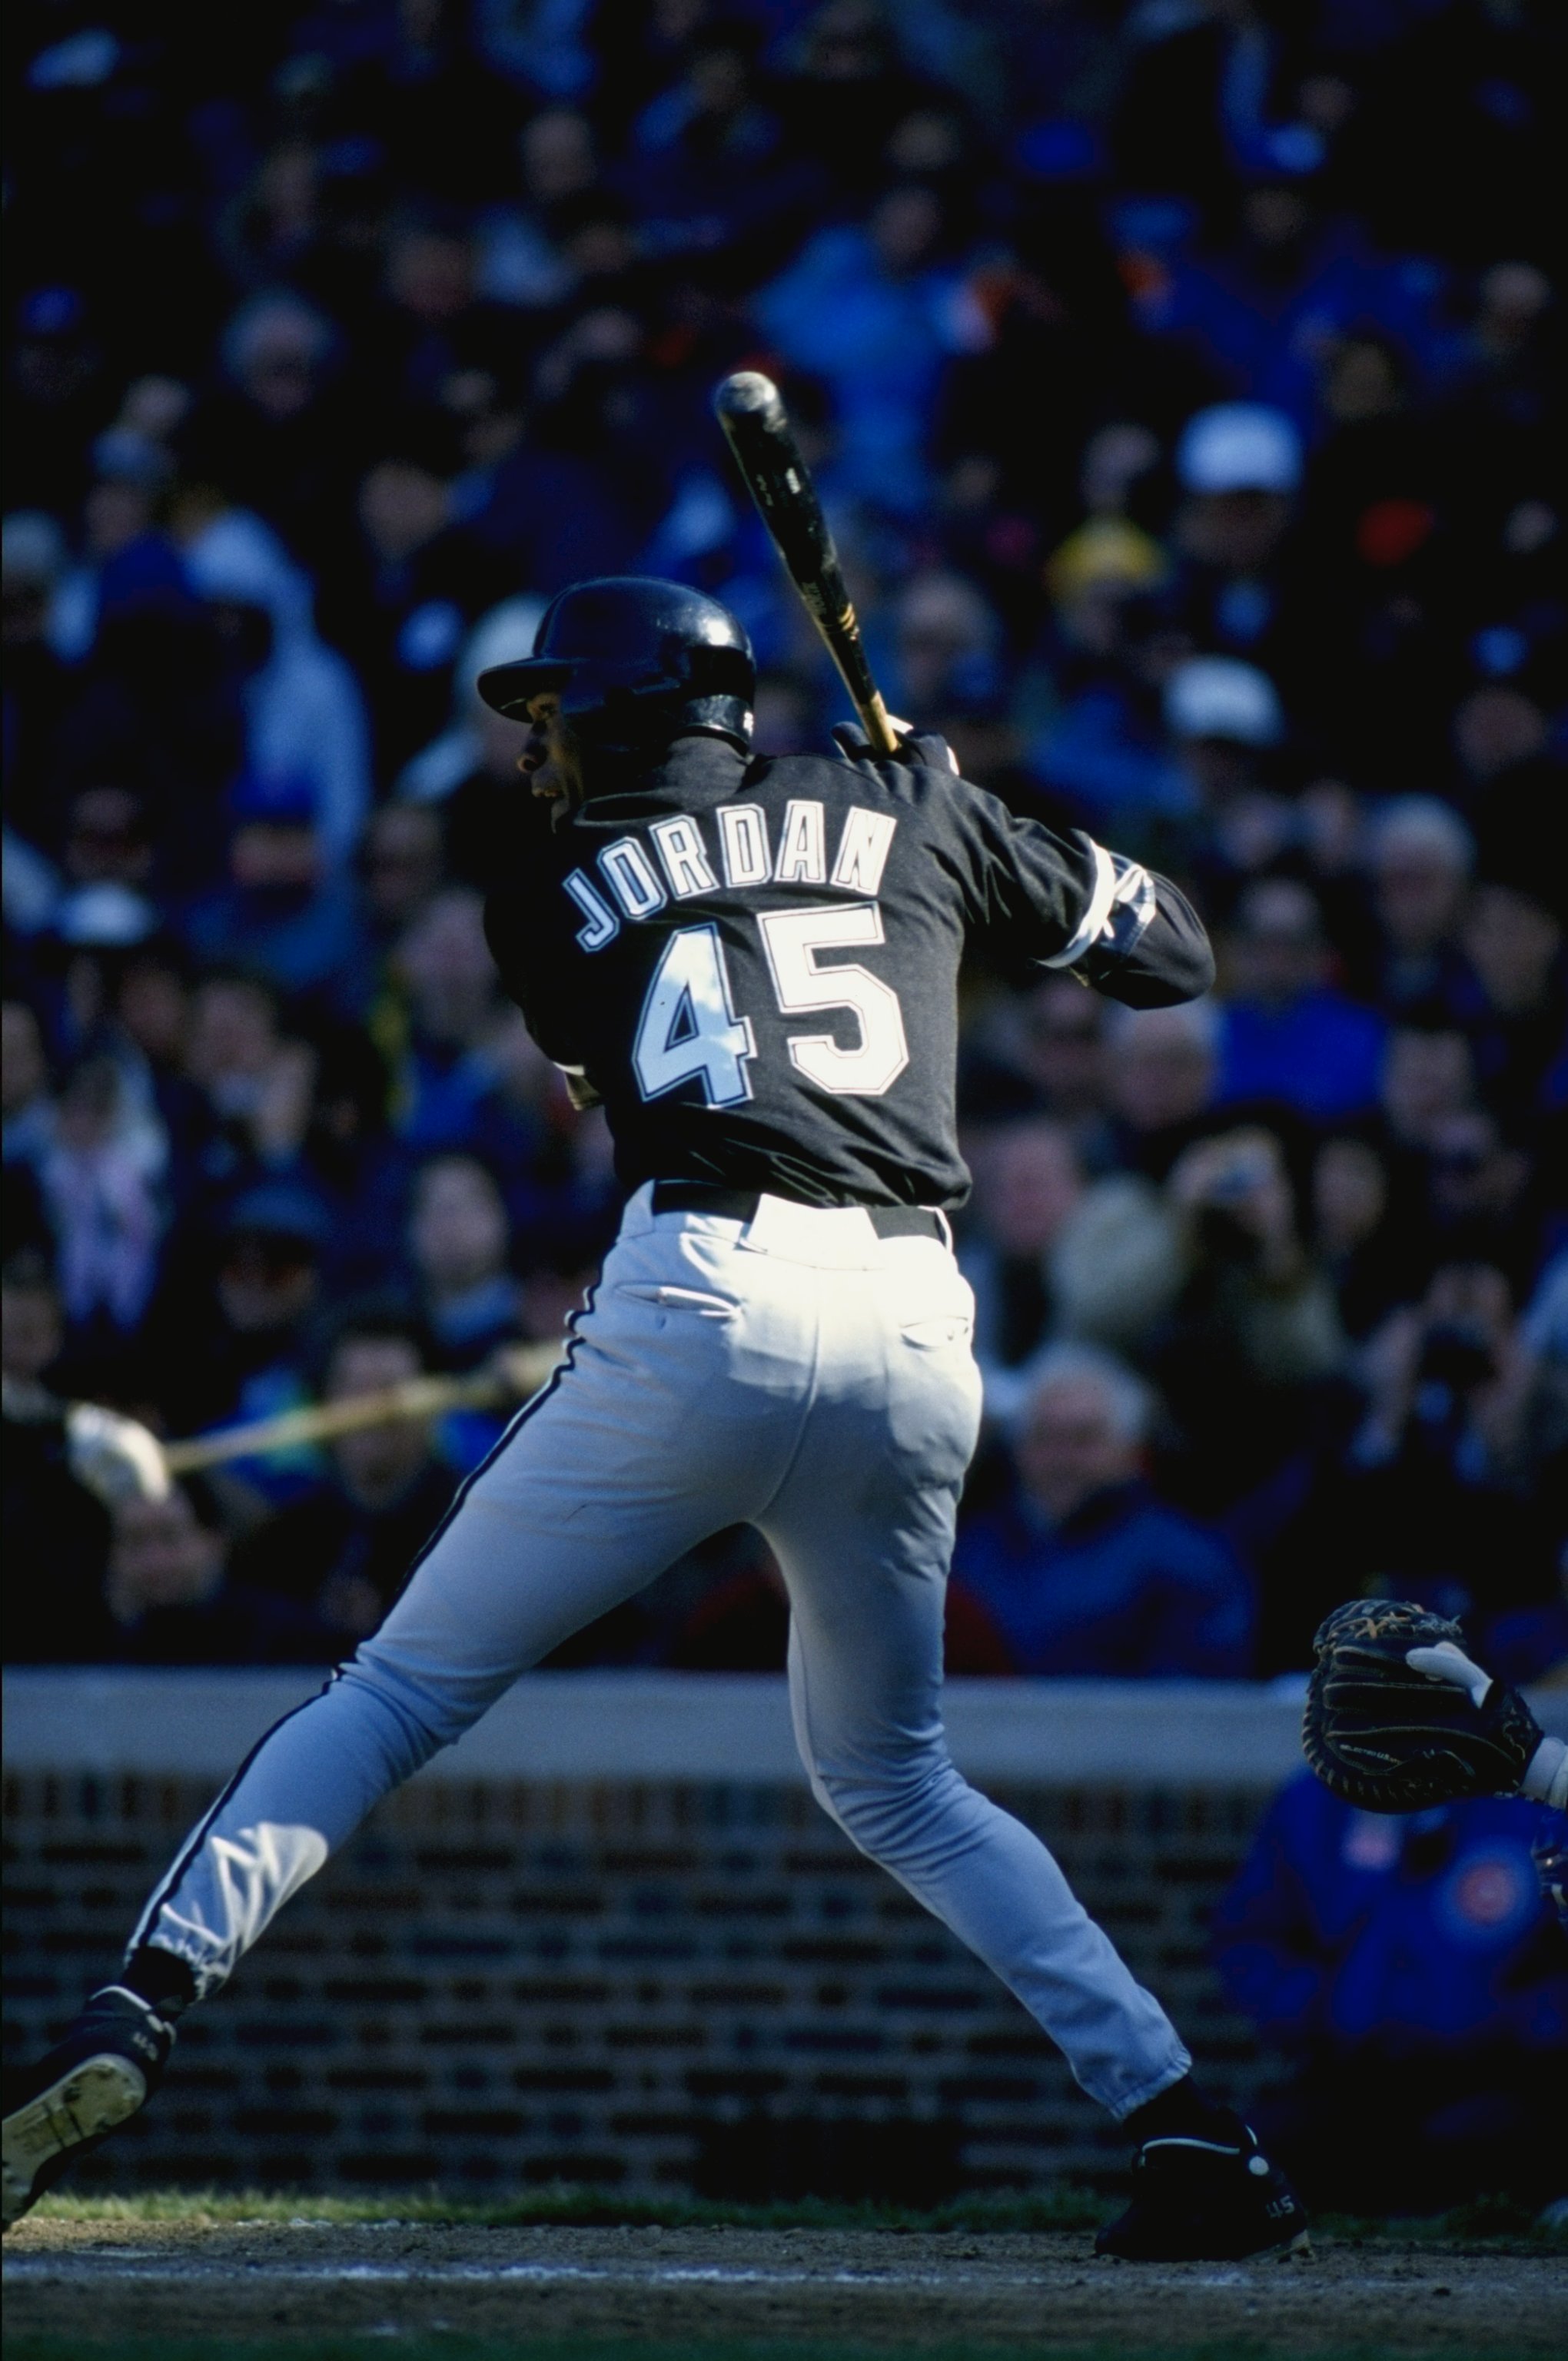 25 years ago, Michael Jordan played for the White Sox against the